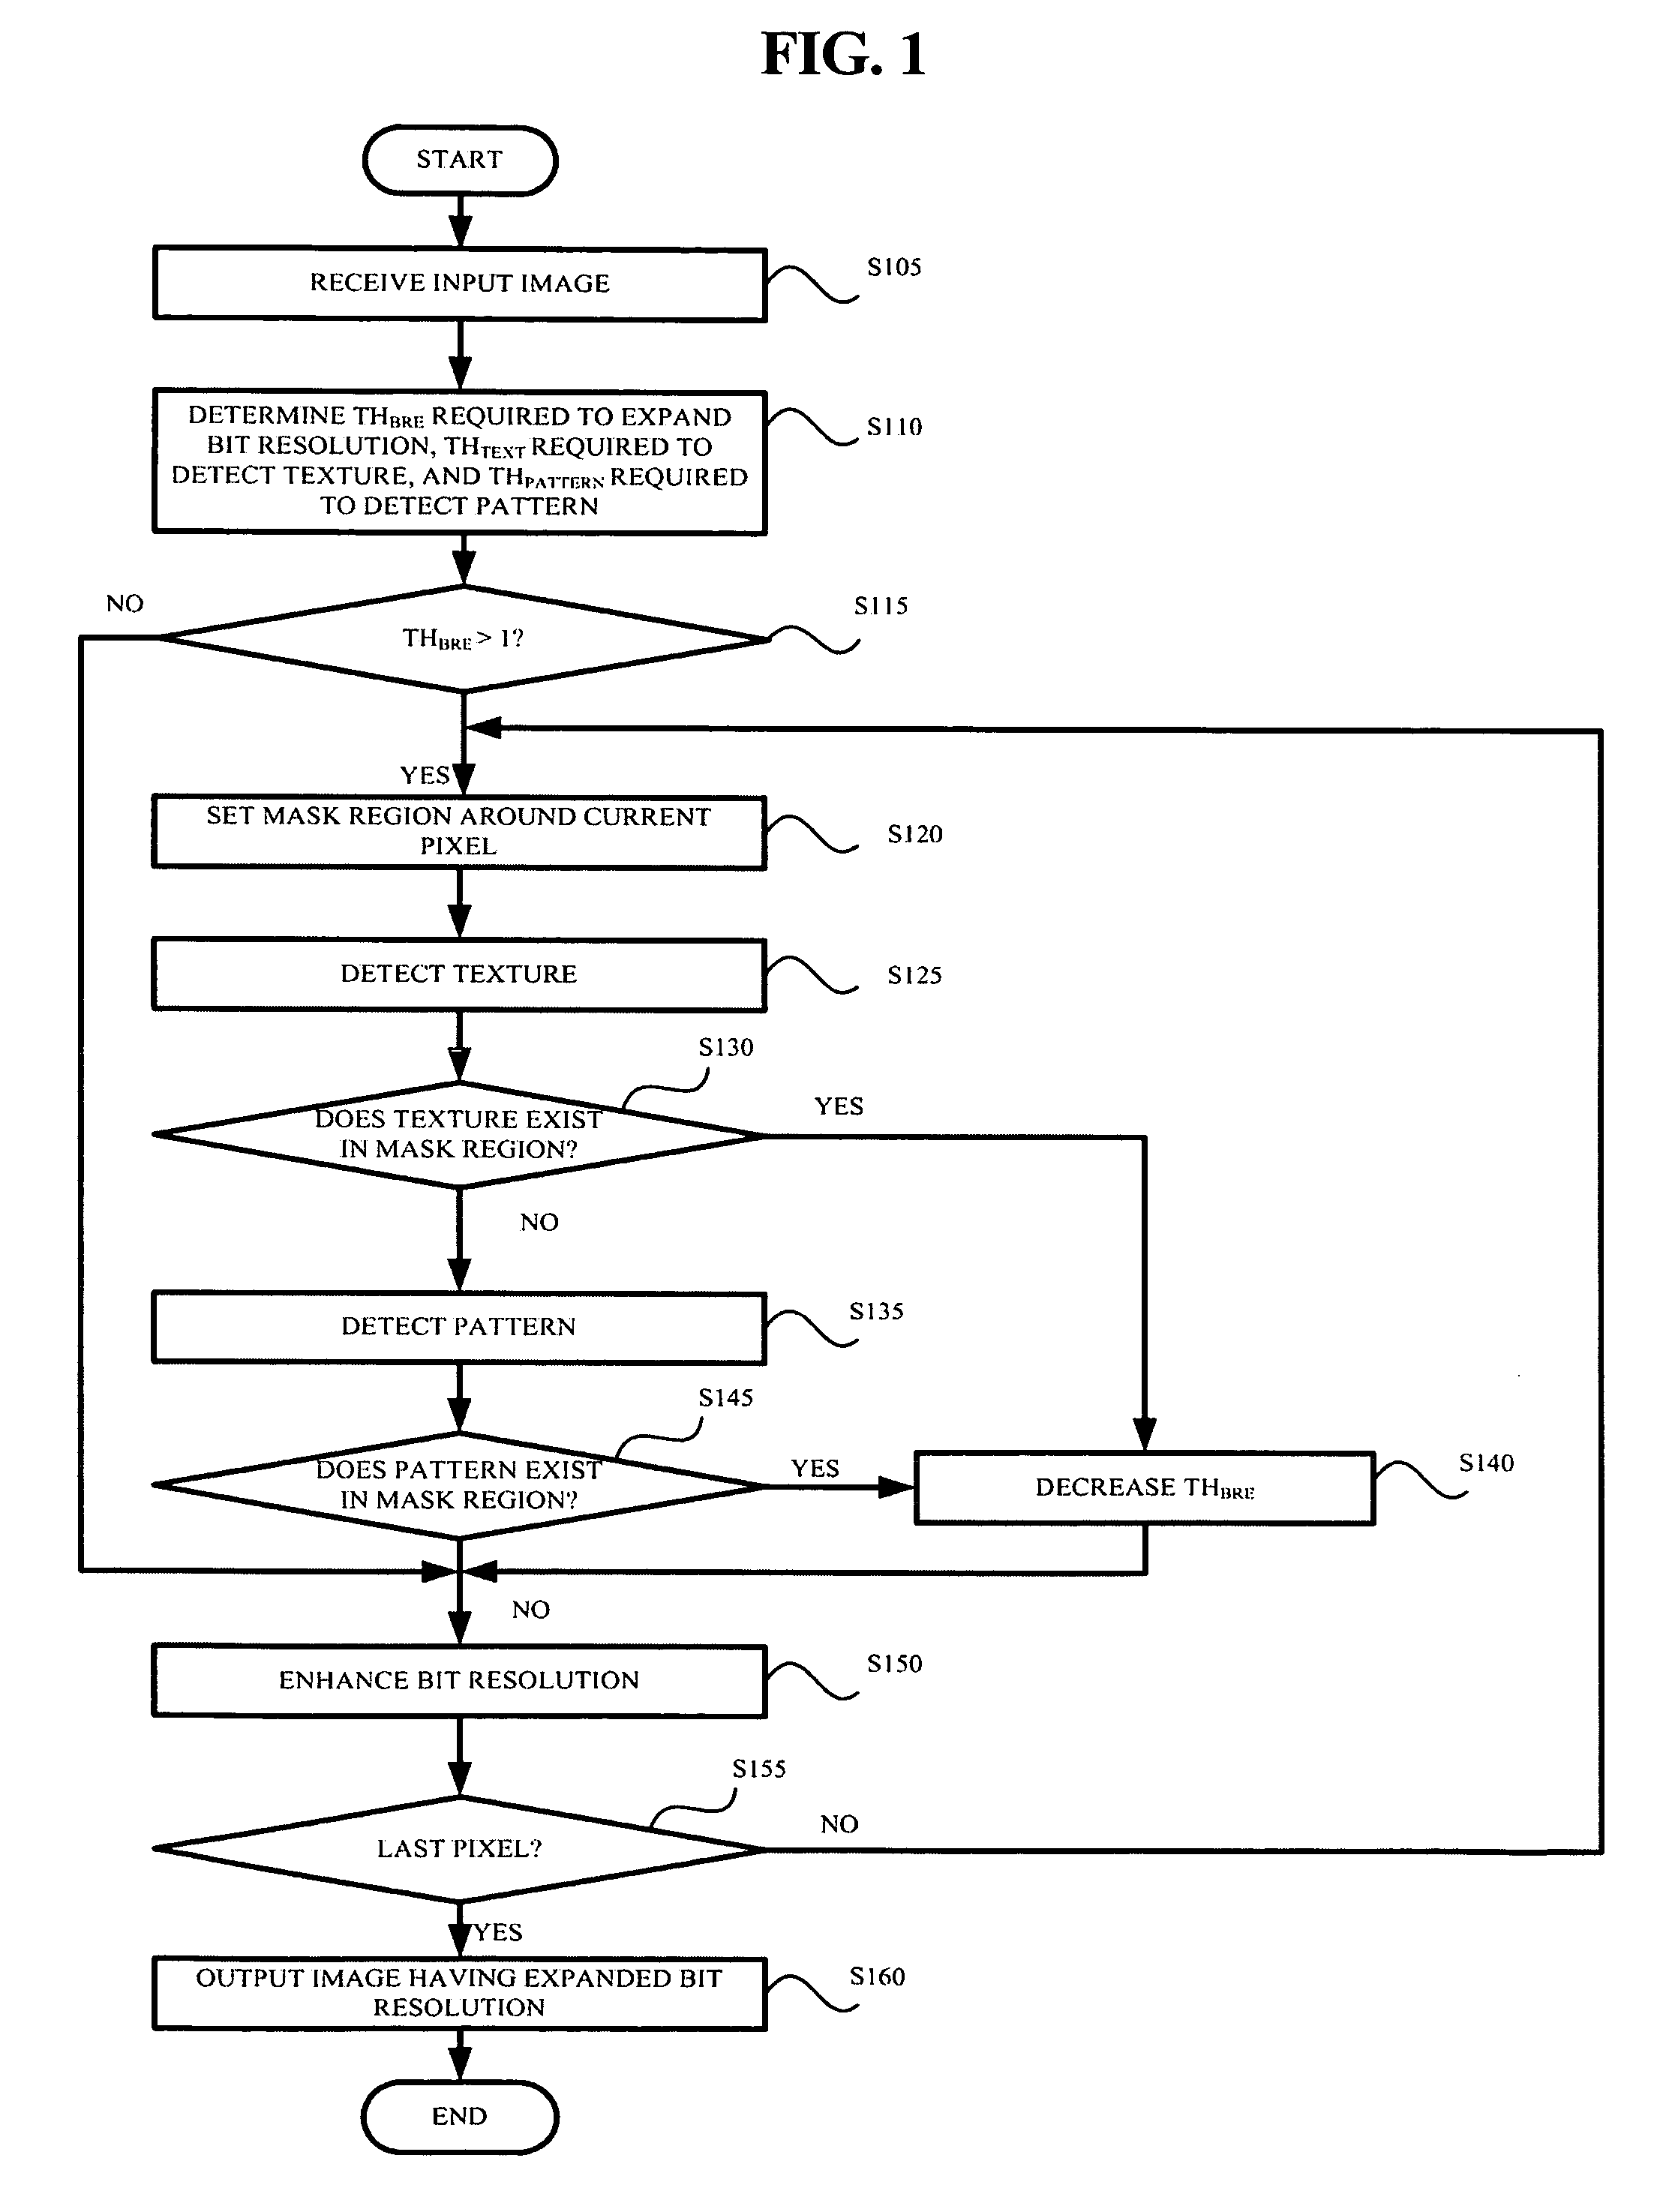 Method and apparatus for expanding bit resolution using local information of image